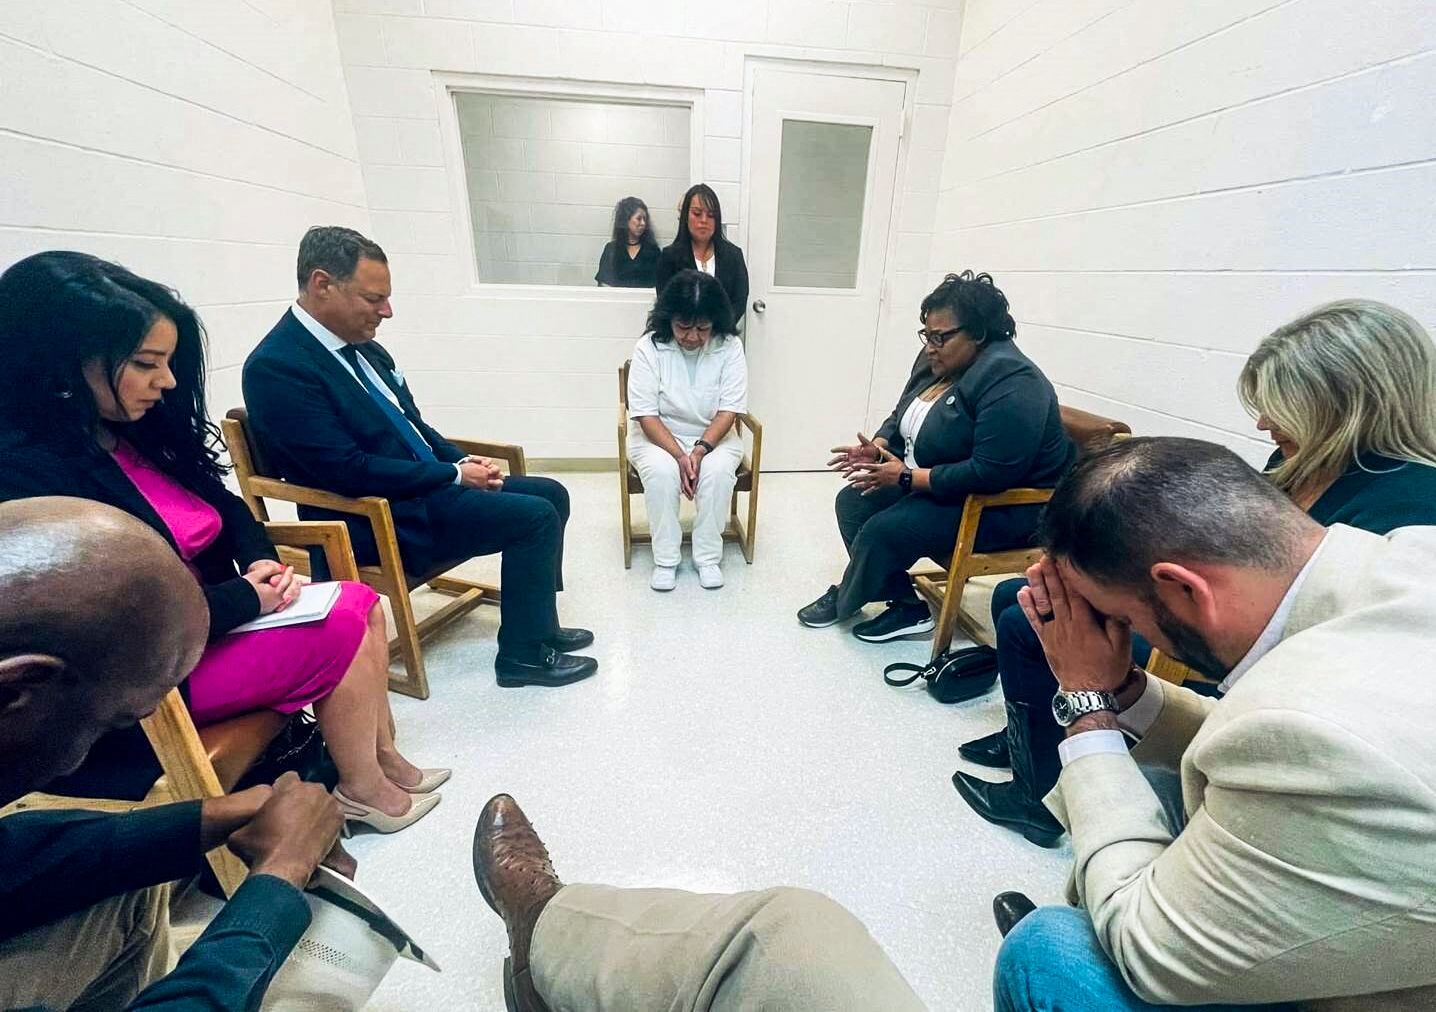 Melissa Lucio bows her head in prayer during a meeting with a bipartisan group of Texas lawmakers at the Gatesville Correctional Facility, Texas, on April 6, 2022. (Jeff Leach/State Rep. Jeff Leach/AFP).